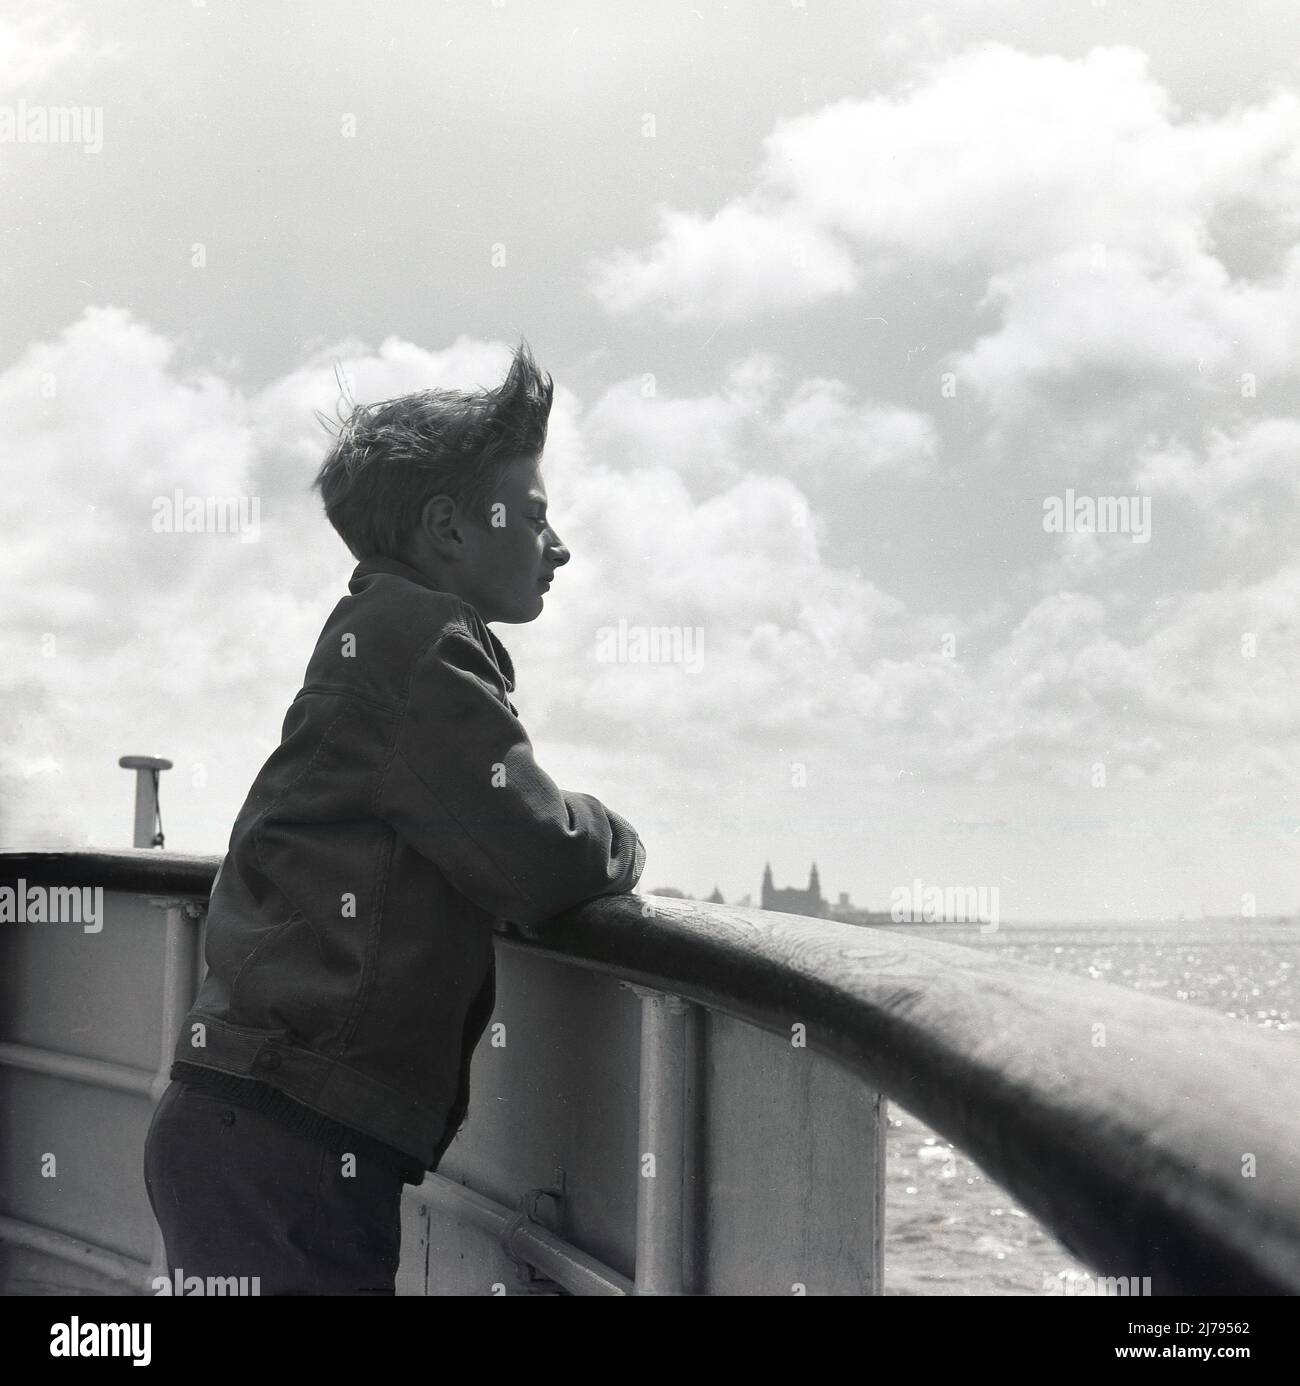 1970, historical, a boy on a boat, leaning on the wooden rail looking out, on the River Mersey, Liverpool, England, UK. The Royal Liver Building can be seen in the far distance. Stock Photo